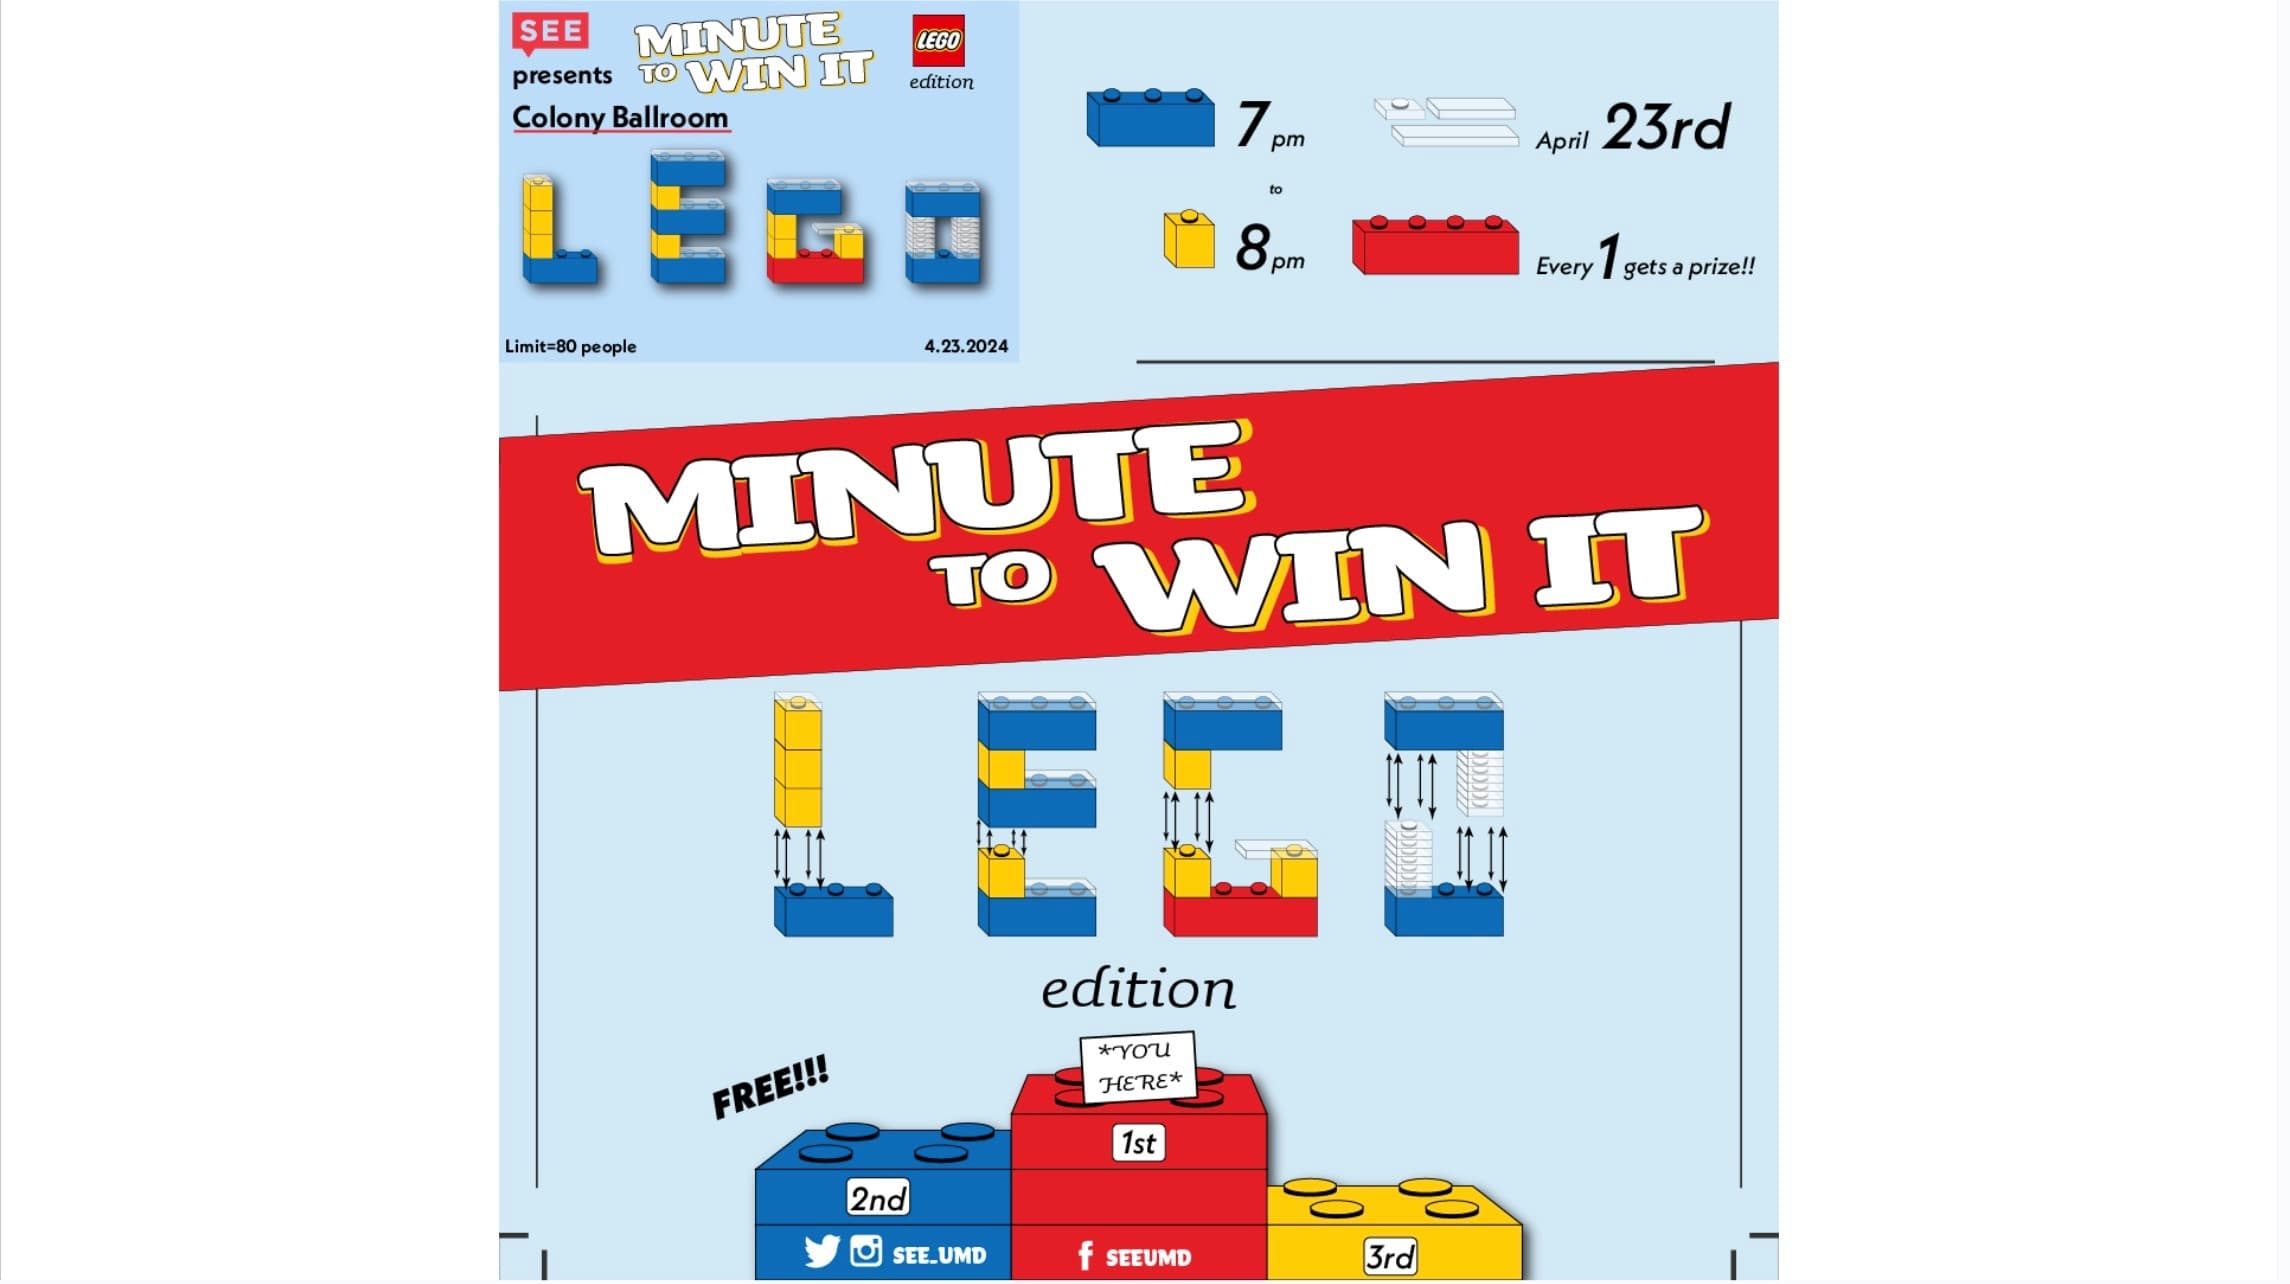 SEE A Minute To Win It: Lego Edition